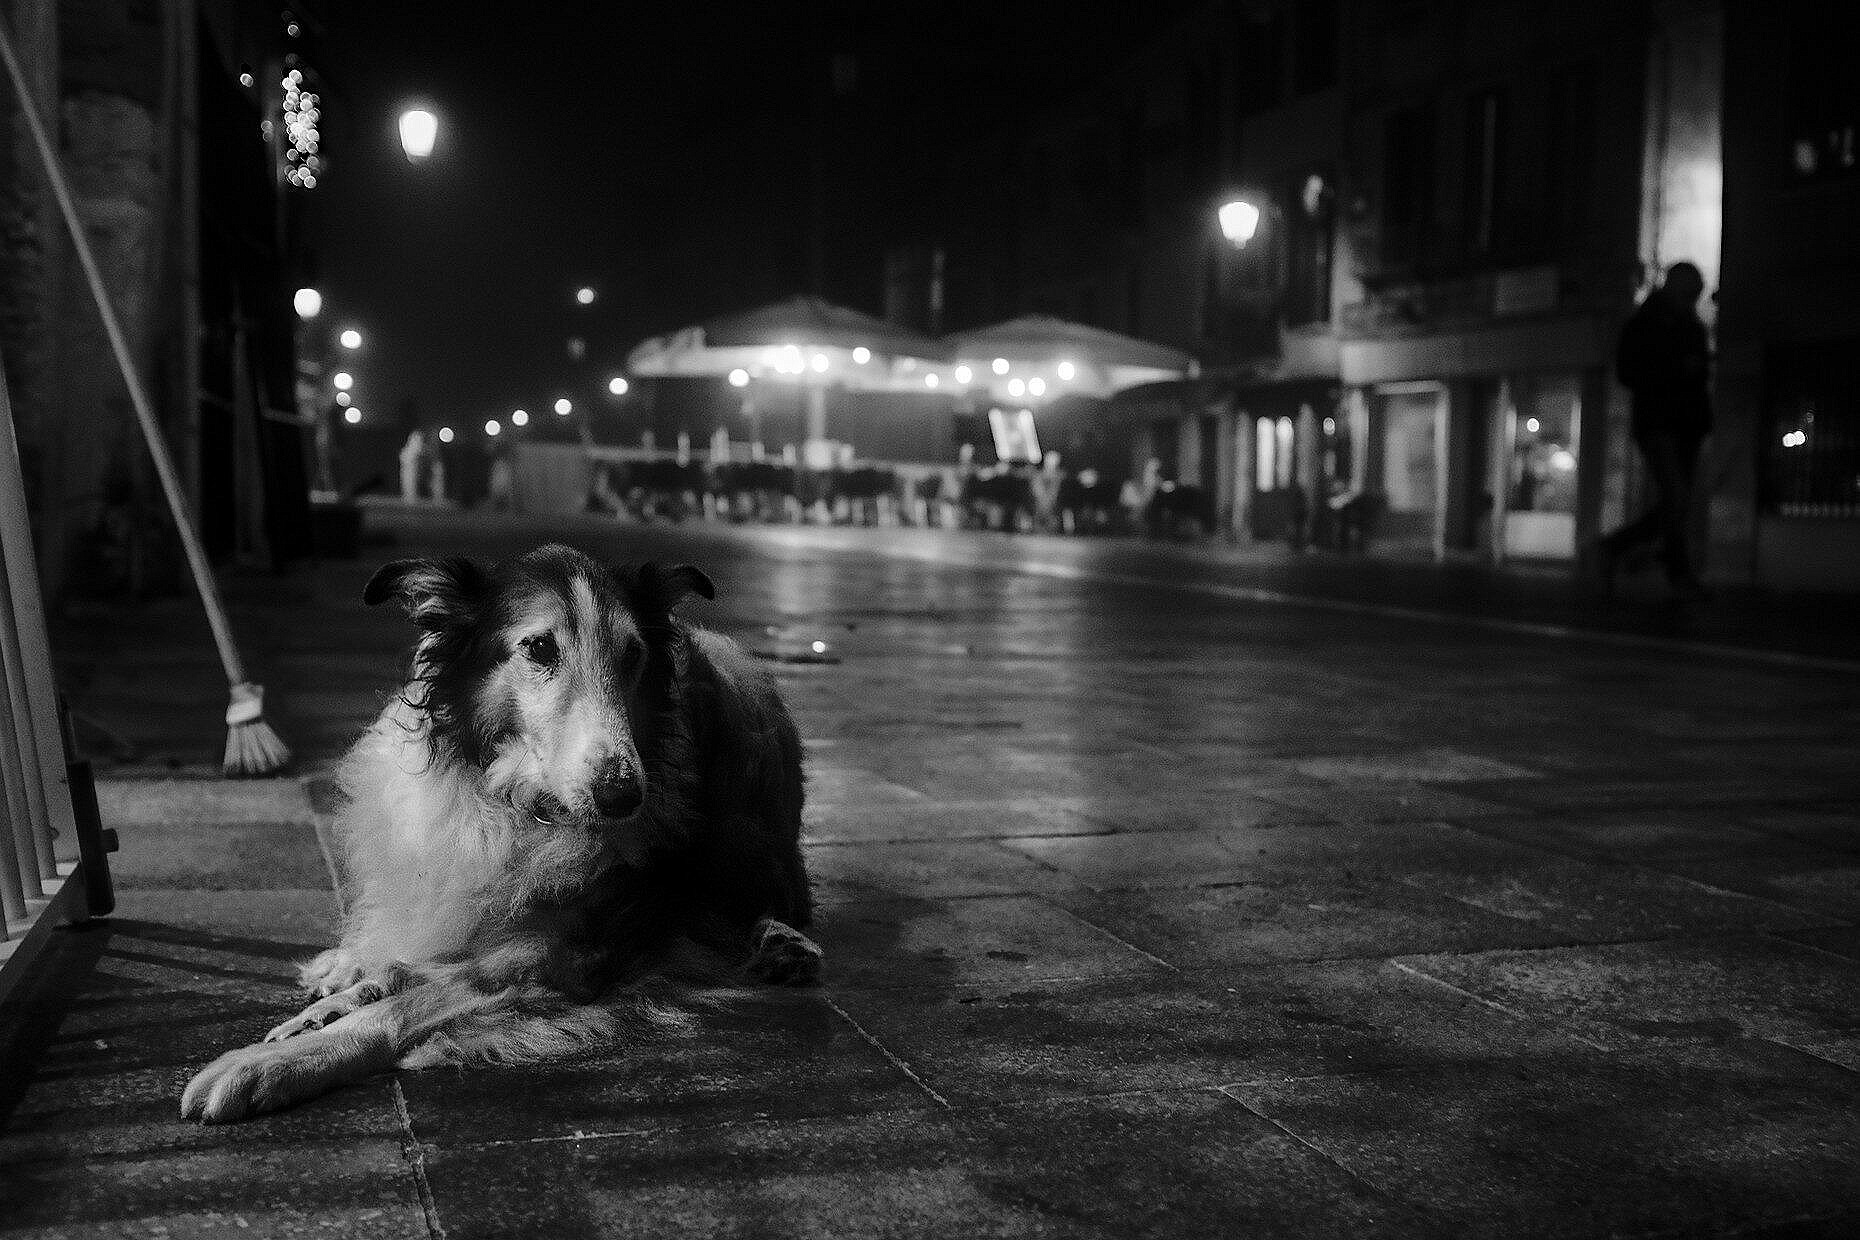 Penny in the Via Garibaldi for her evening walk with a bit of mist. Being old she likes to rest at the local bar, even though it was closing.